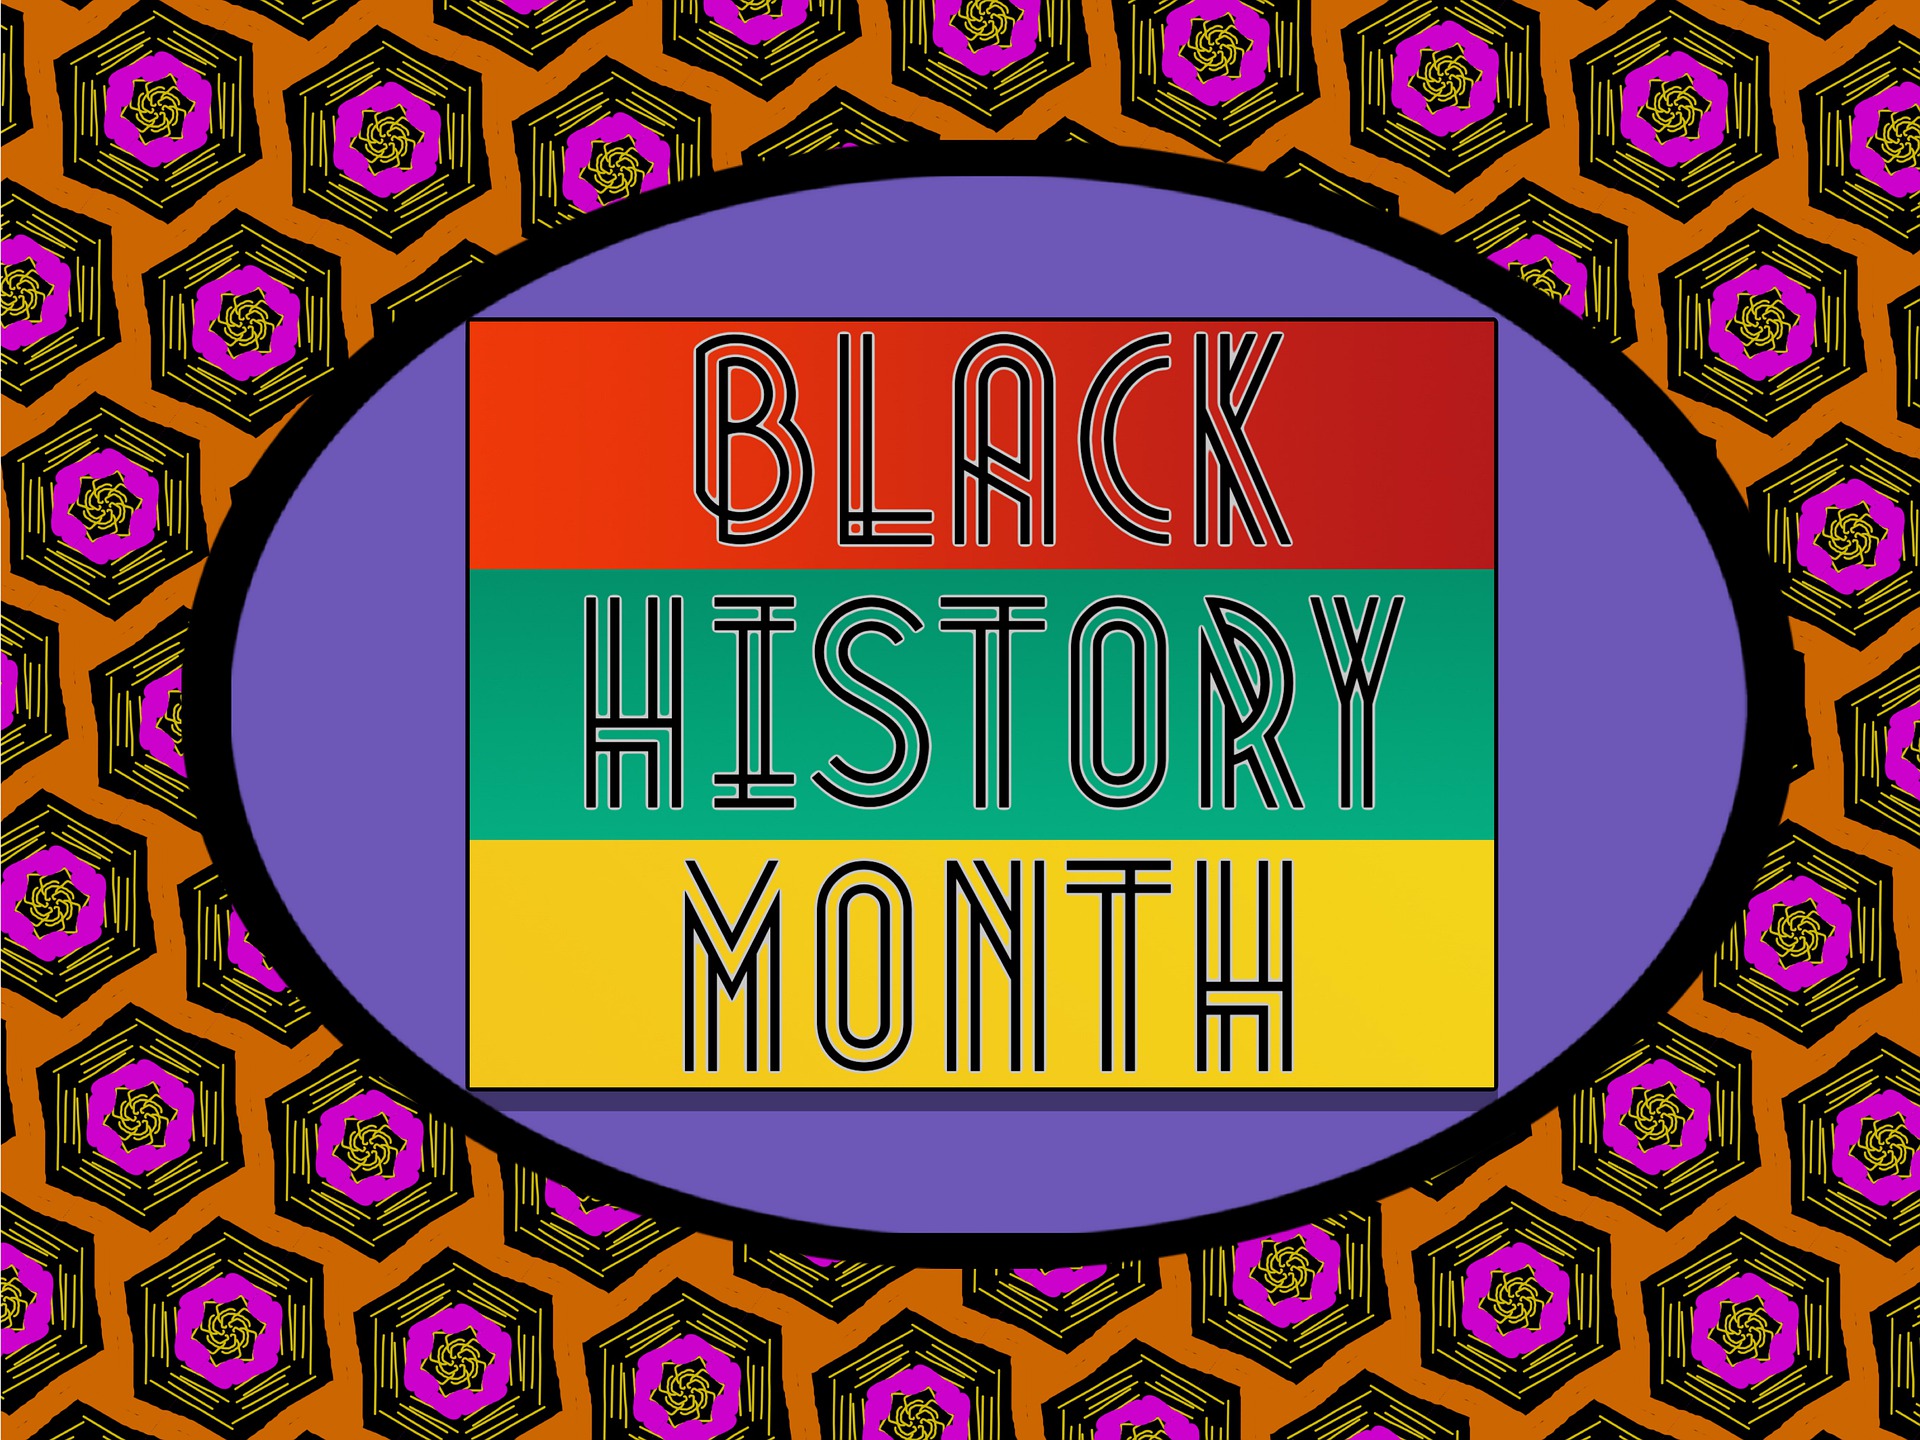 On a patterned background, a purple oval holds a red stripe, a green stripe and a yellow stripe with the words "Black History Month."